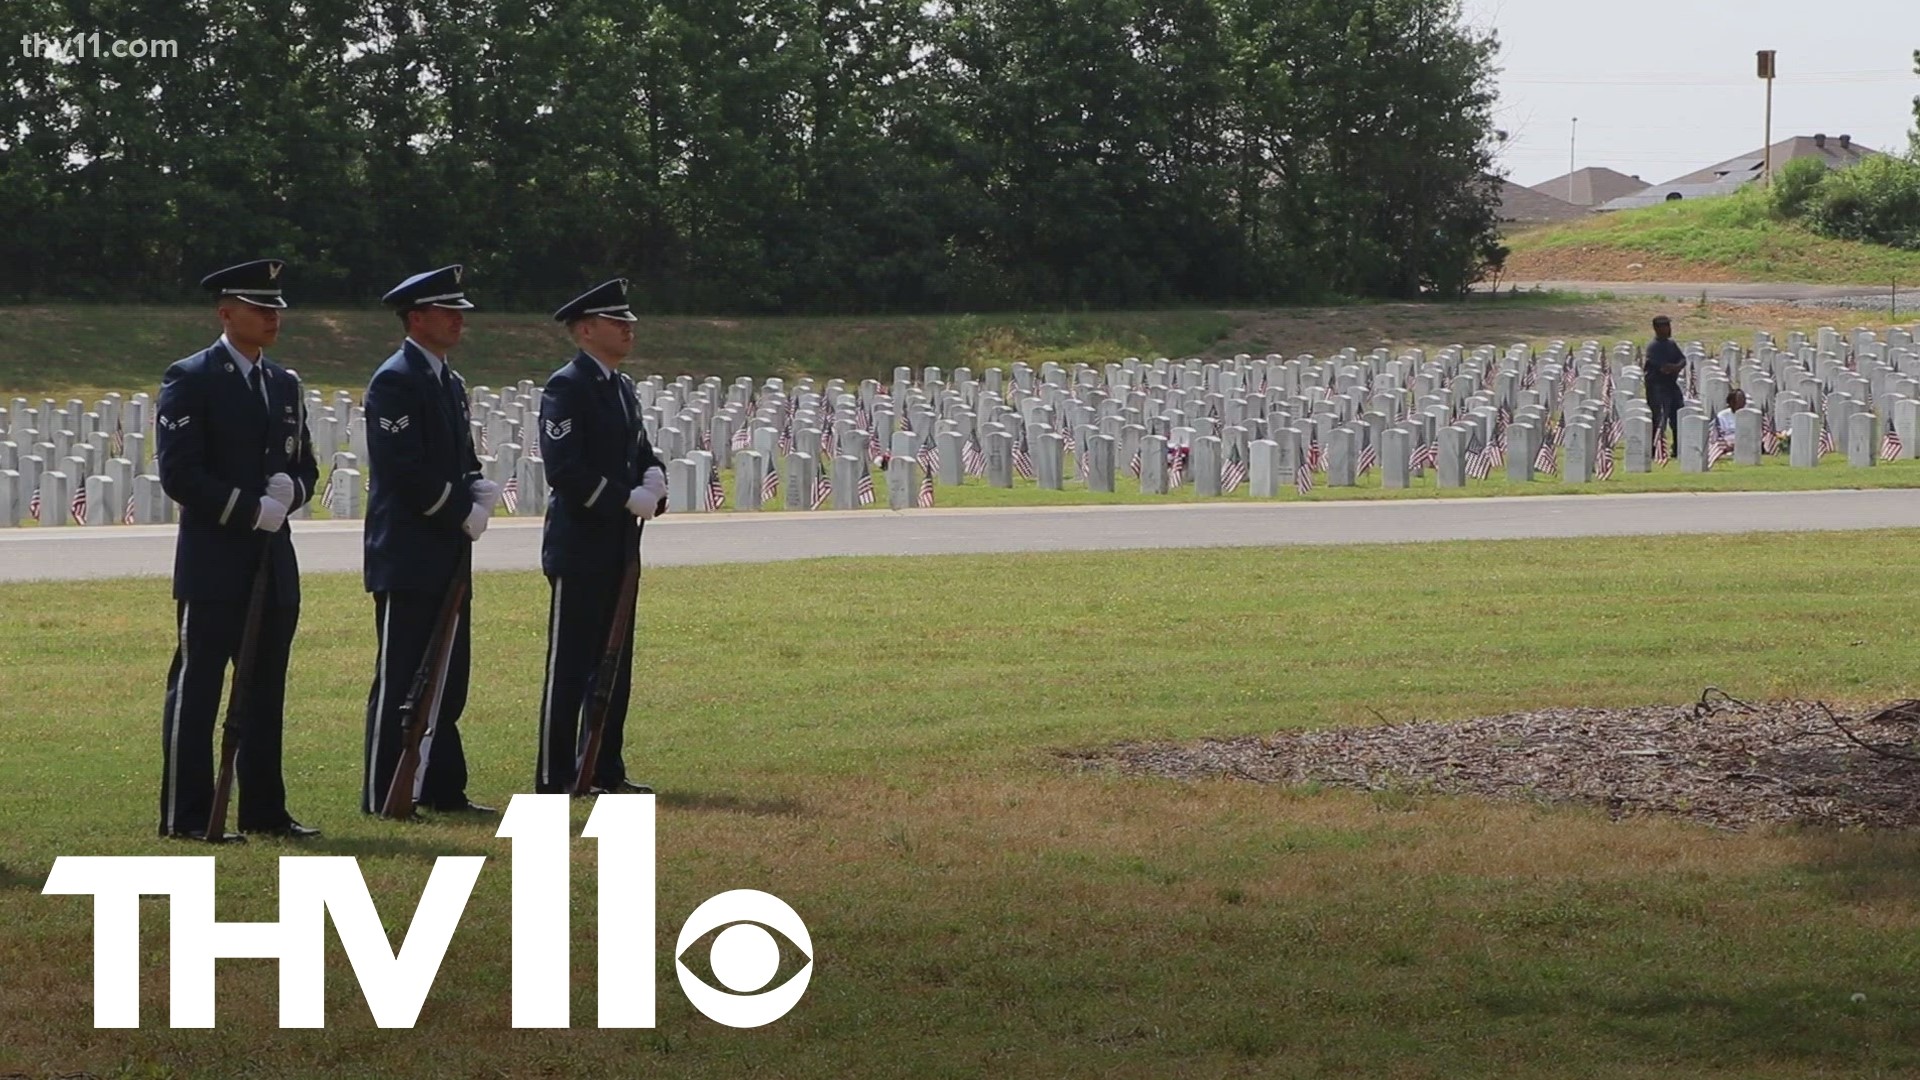 This Memorial Day, hundreds gathered at the Veterans Cemetery in North Little Rock to honor and remember their fallen friends and family members.